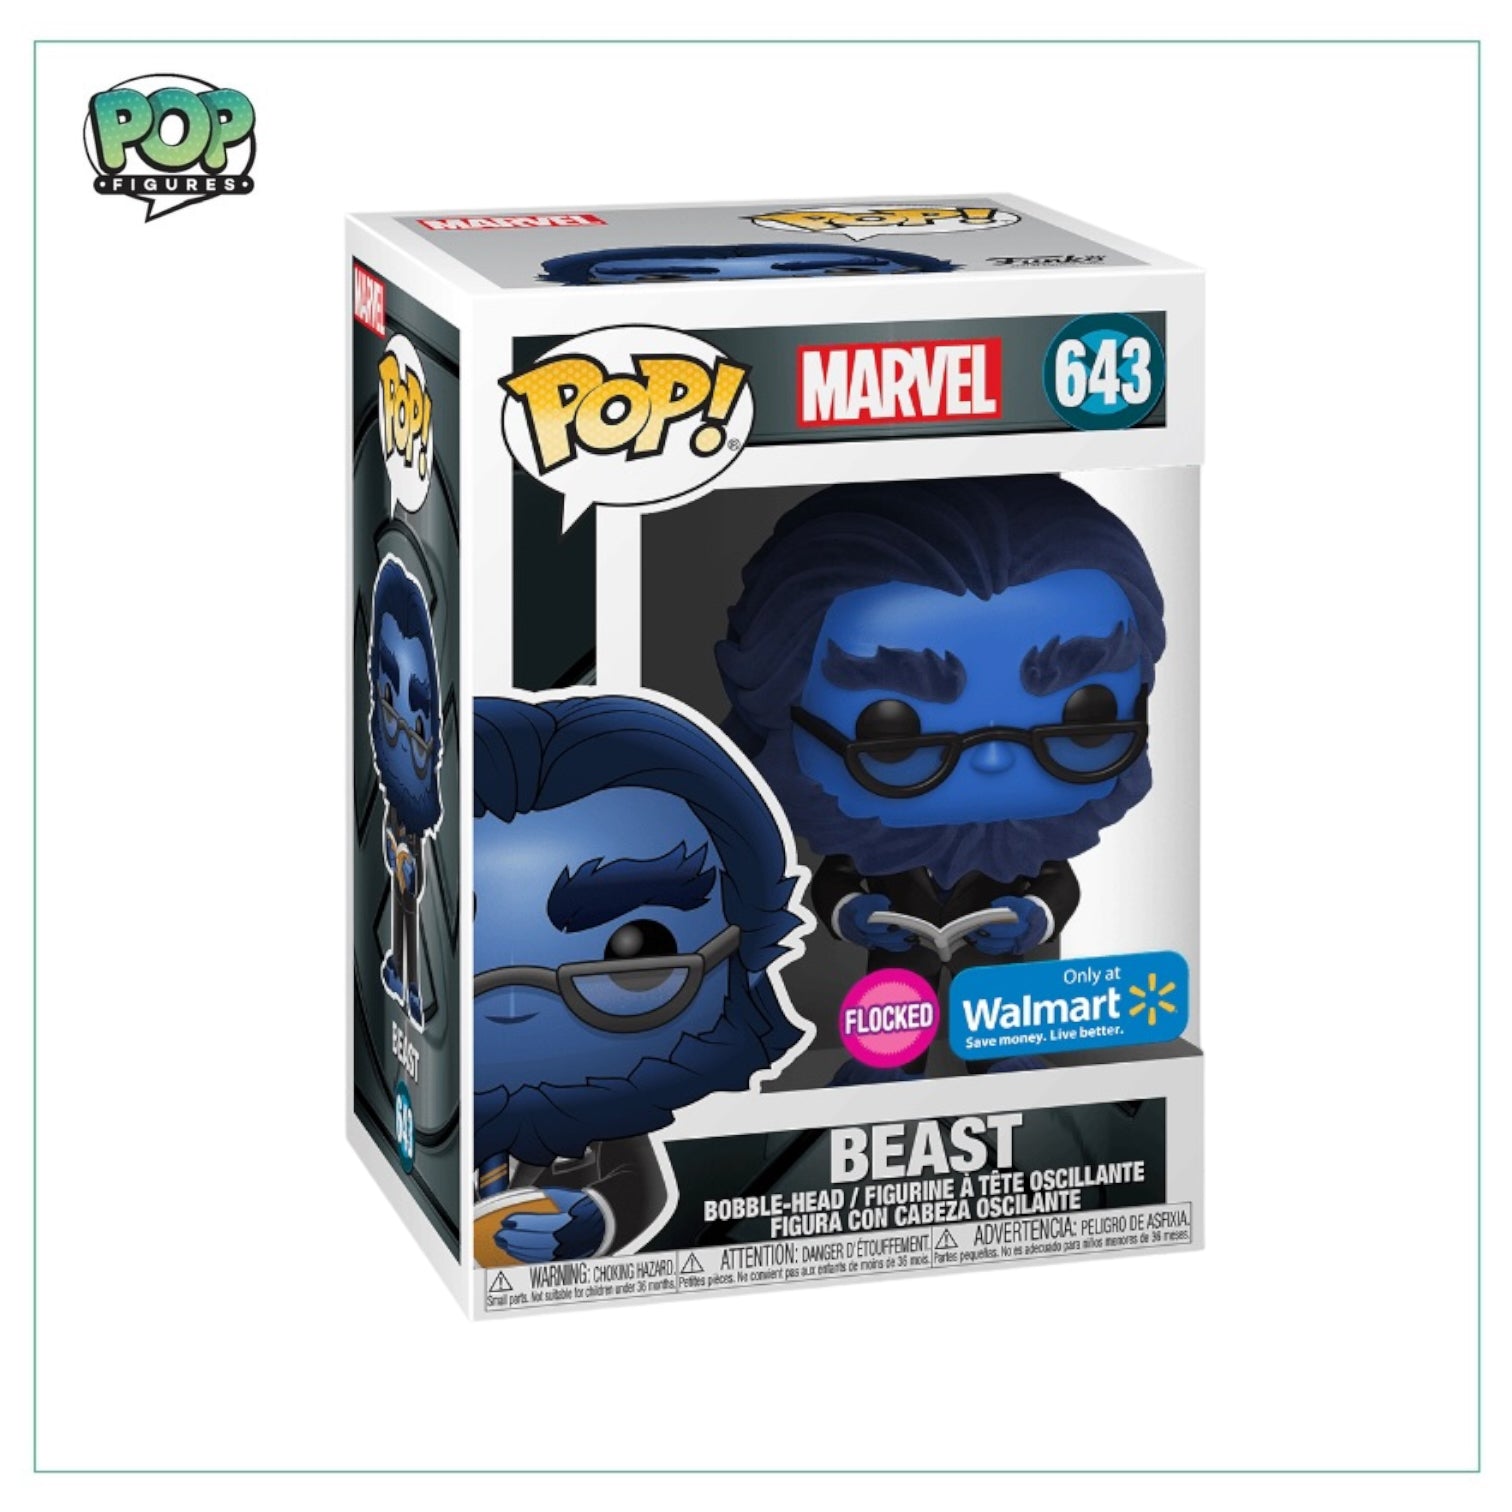 Beast #643 Flocked Edition With Walmart Sticker. Marvel X-Men: The Last Stand